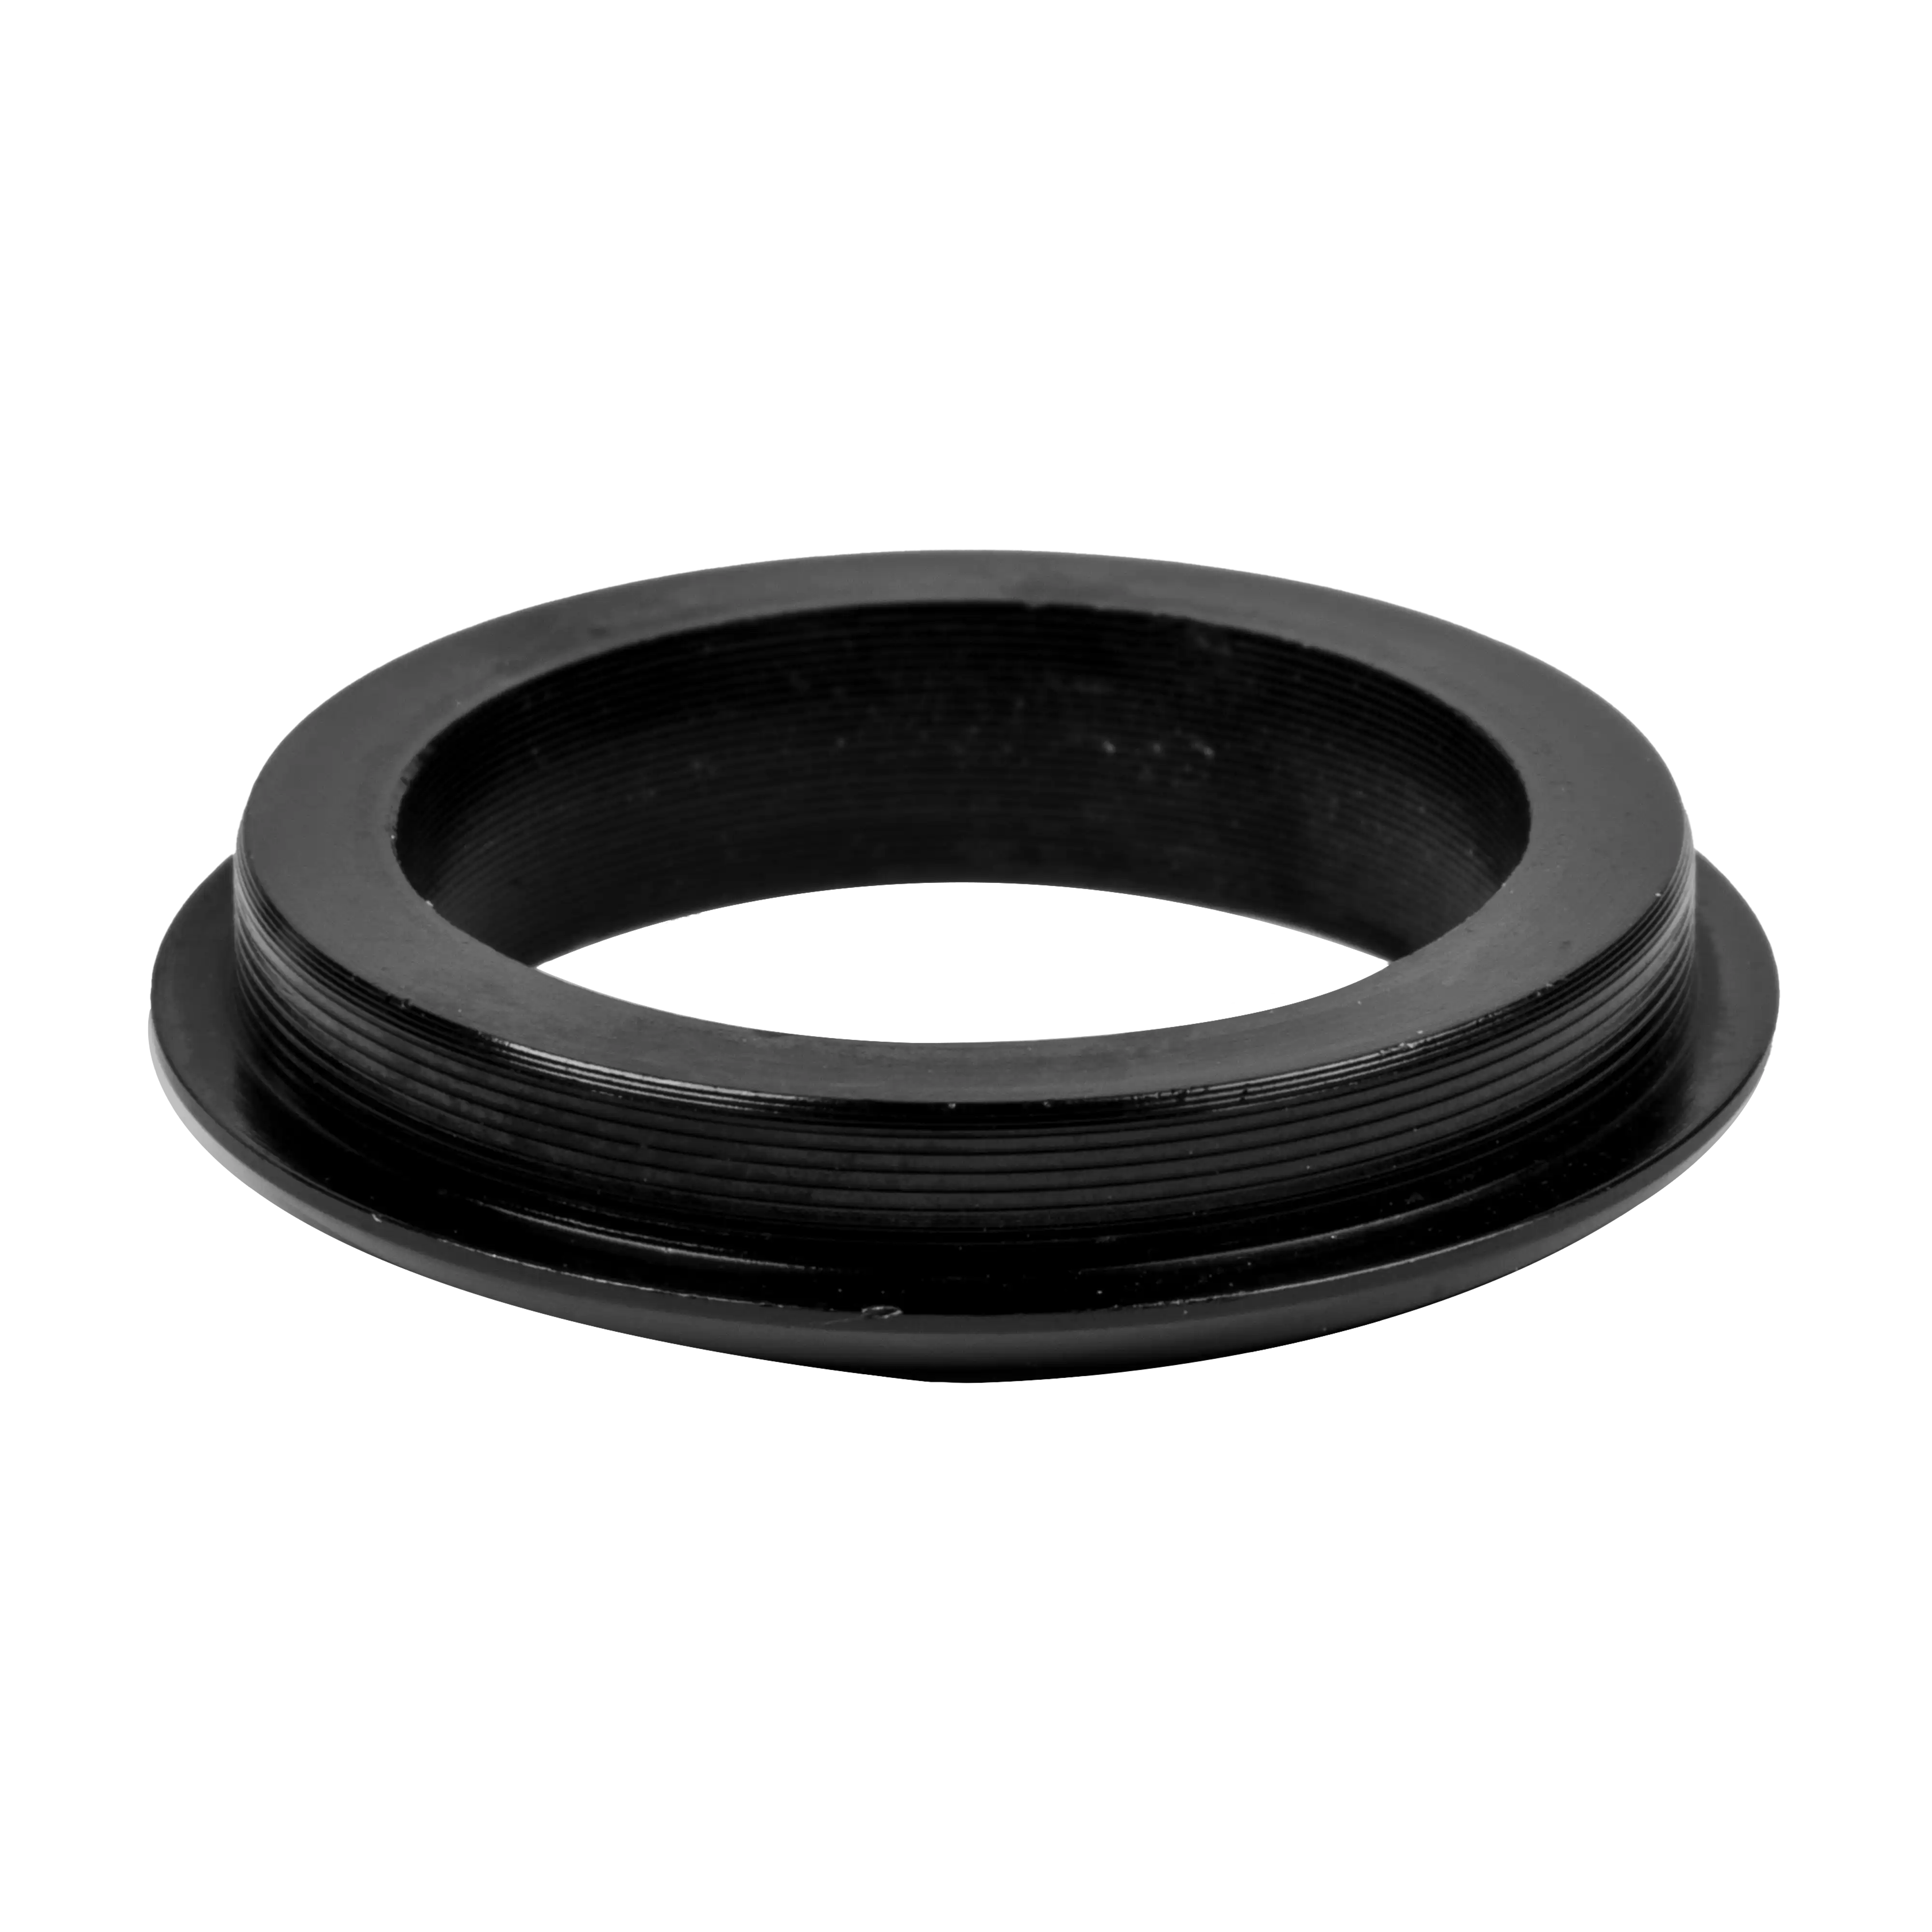 Trim Ring for G2 16" Saltwater Carbon Handle System